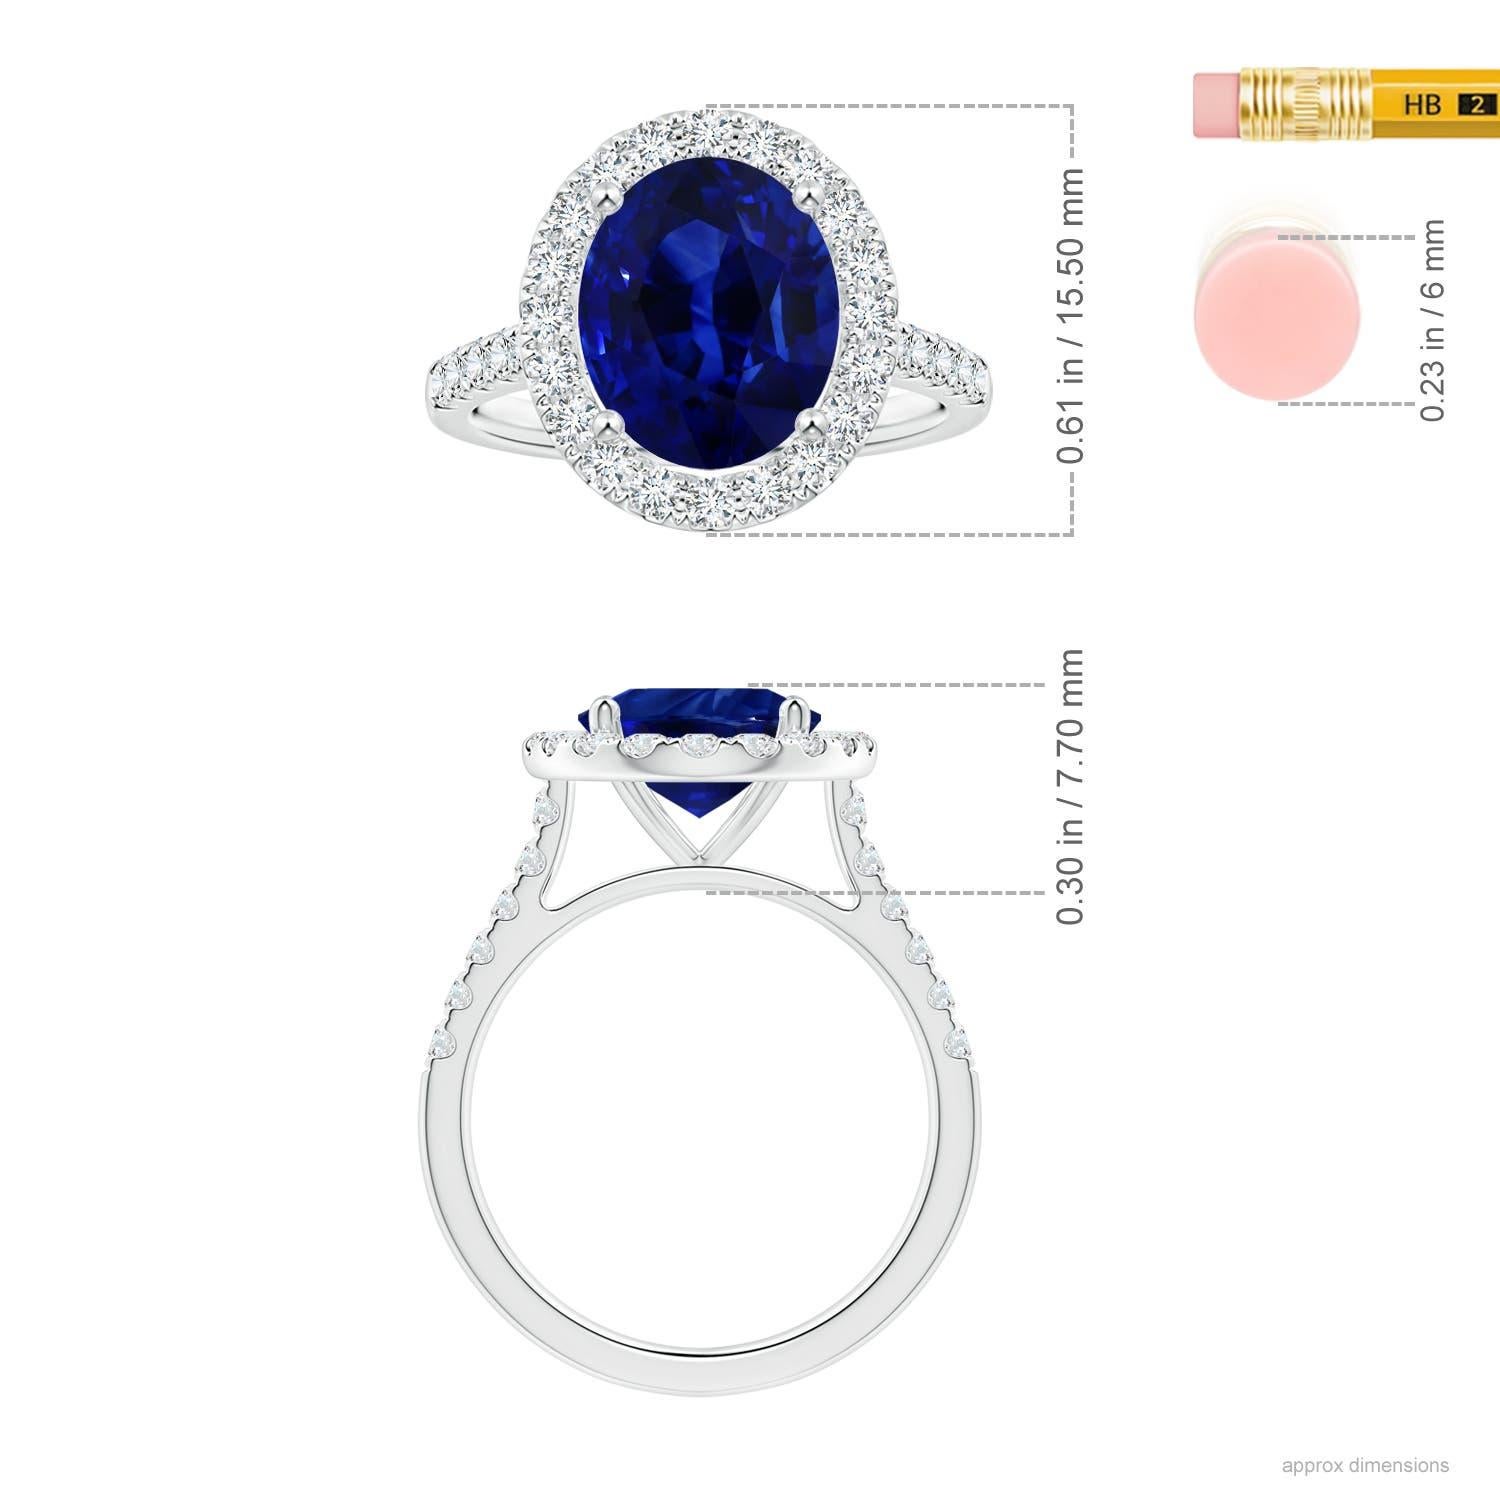 For Sale:  Angara Gia Certified Natural Blue Sapphire Halo Ring in White Gold with Diamonds 5